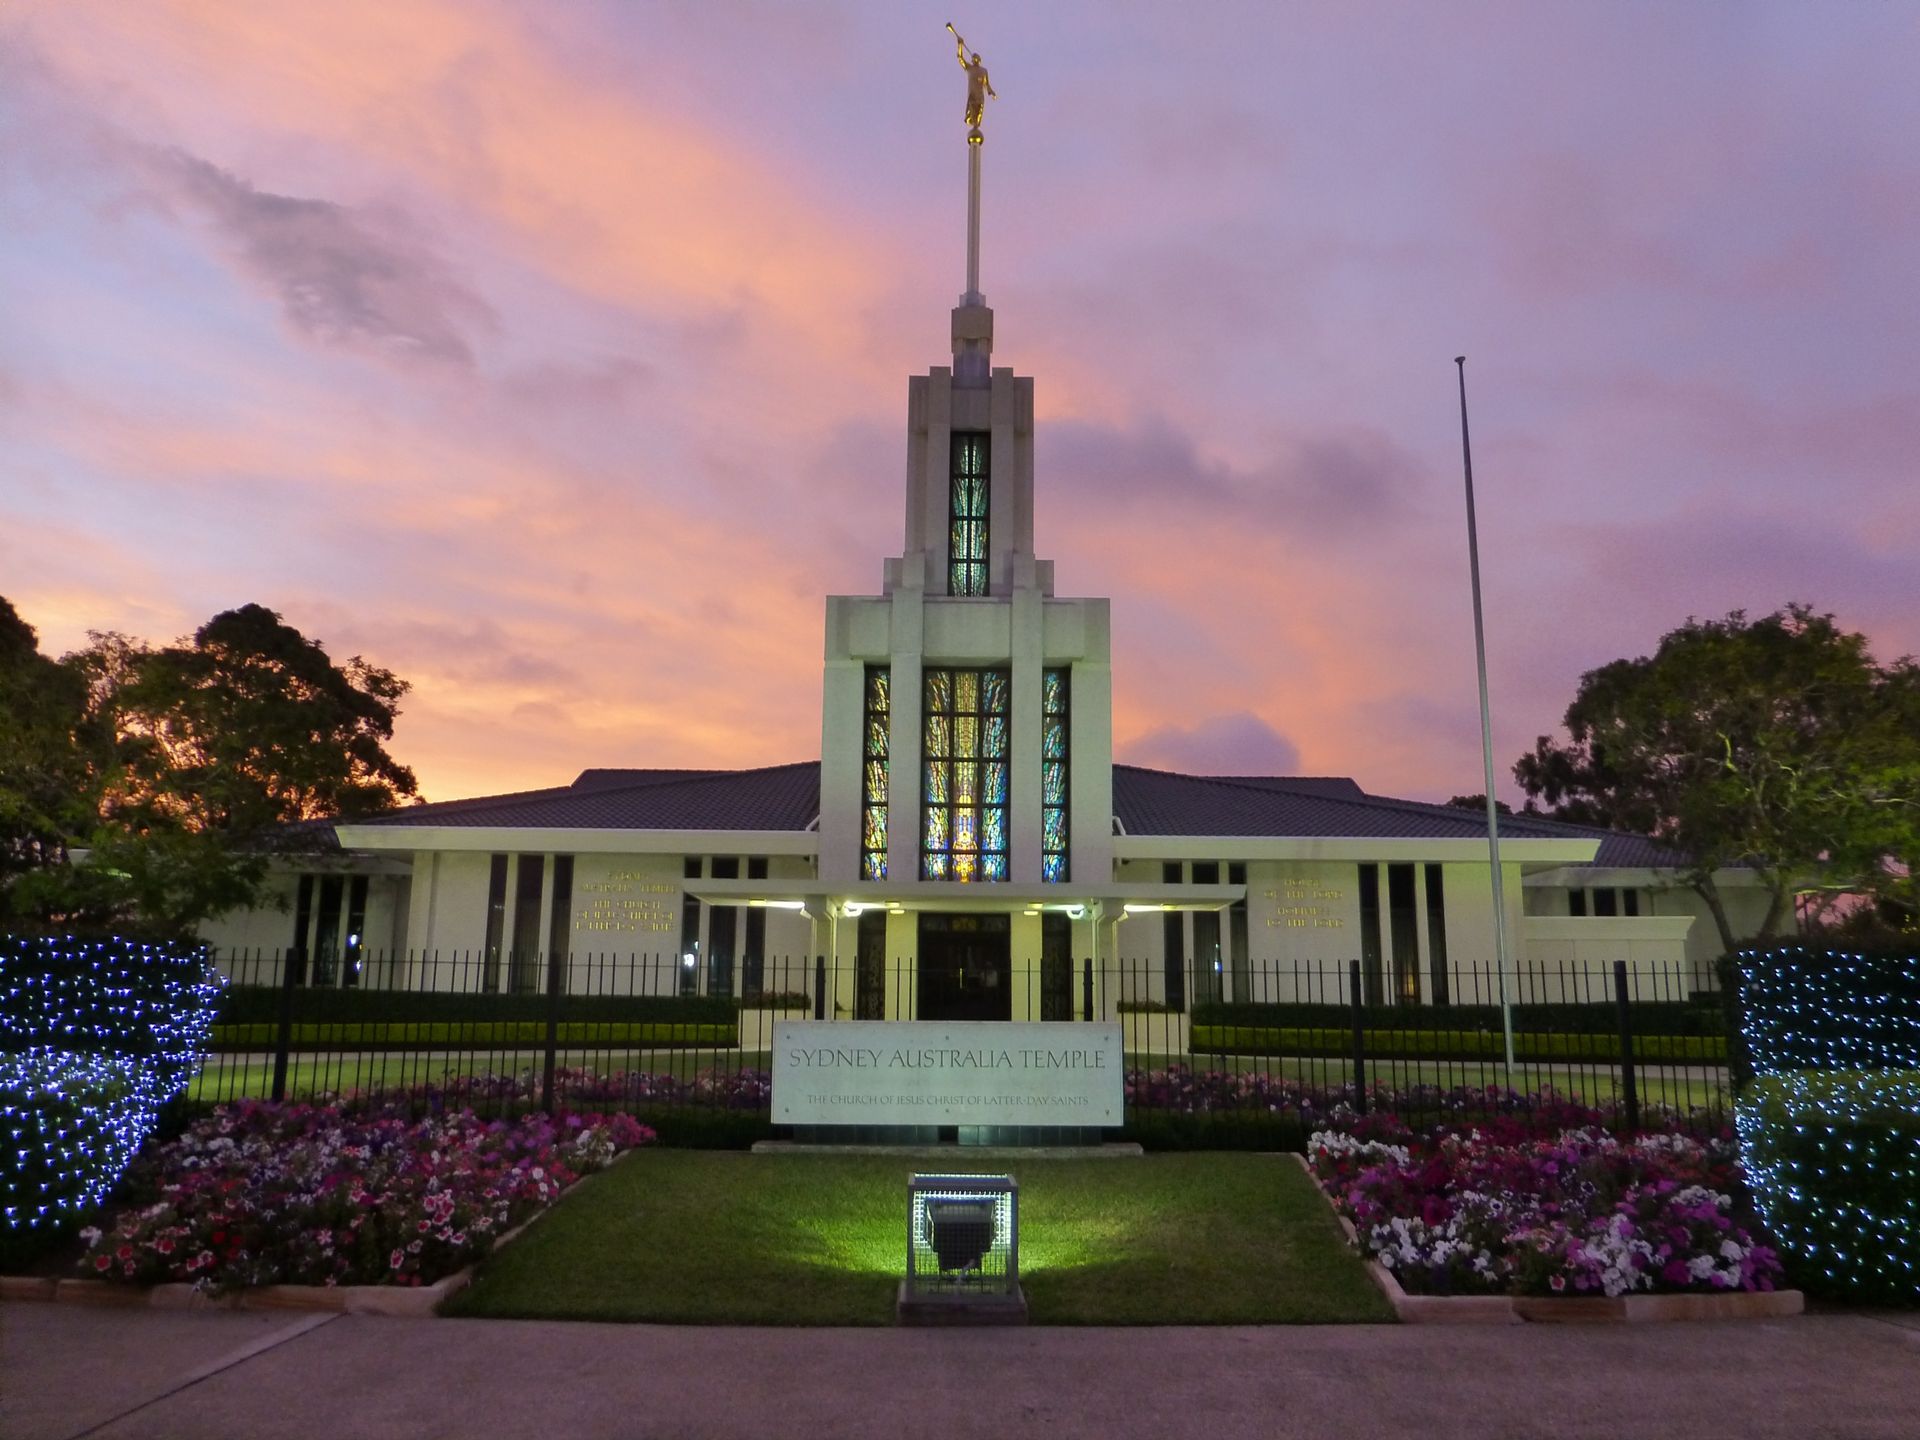 The Sydney Australia Temple, including the name sign, scenery, and entrance.